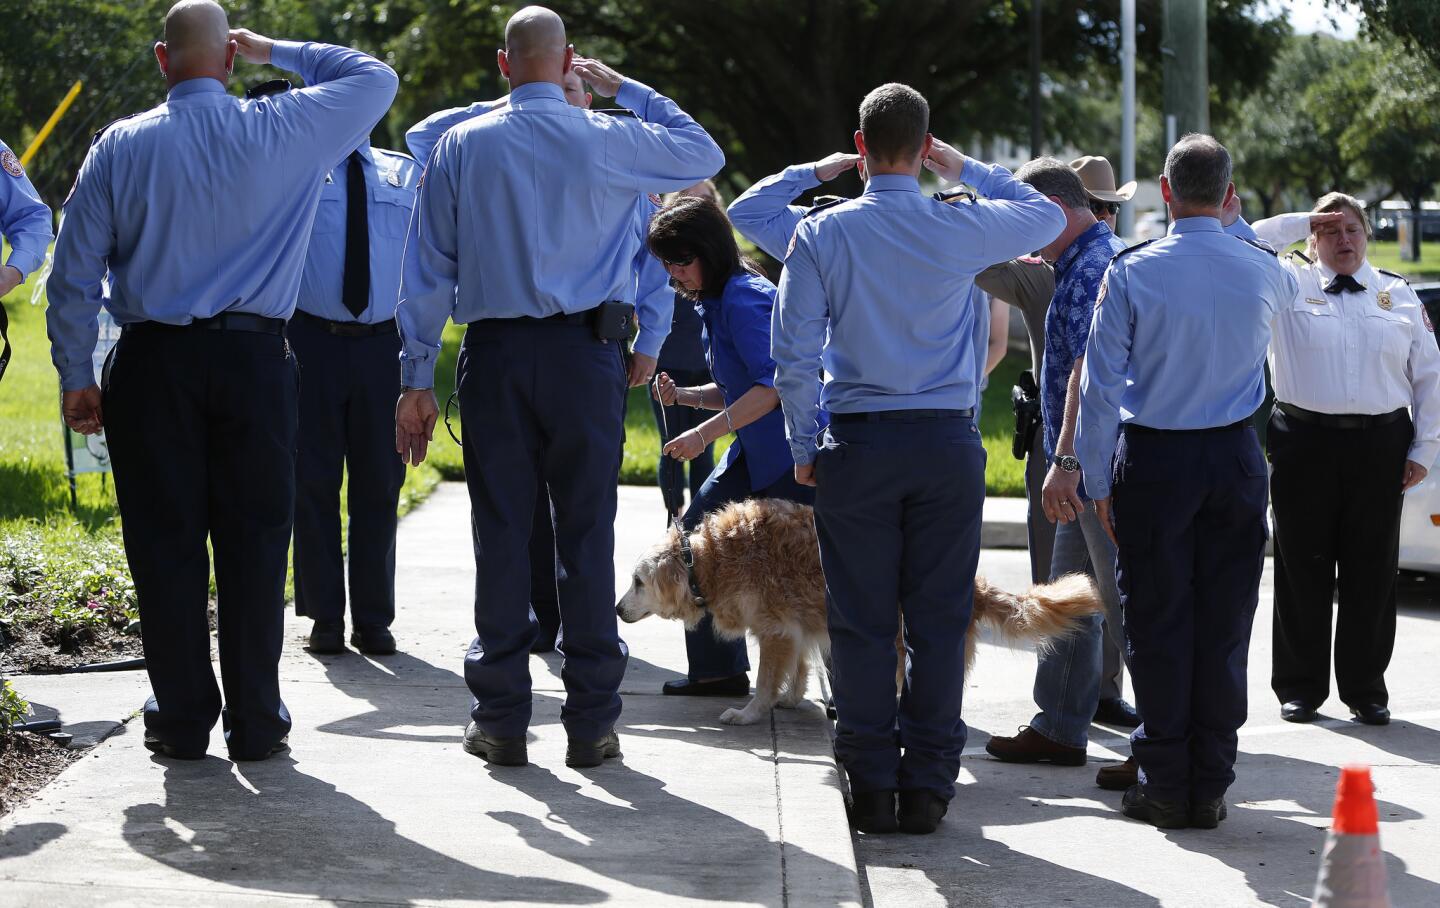 Bretagne, the last surviving search and rescue dog from 9/11, is walked by her handler Denise Corliss past a flank of members of the Cy-Fair Volunteer Fire Department, as she was brought into the Fairfield Animal Hospital, Monday, June 6, 2016, in Cypress, Texas to be euthanized.